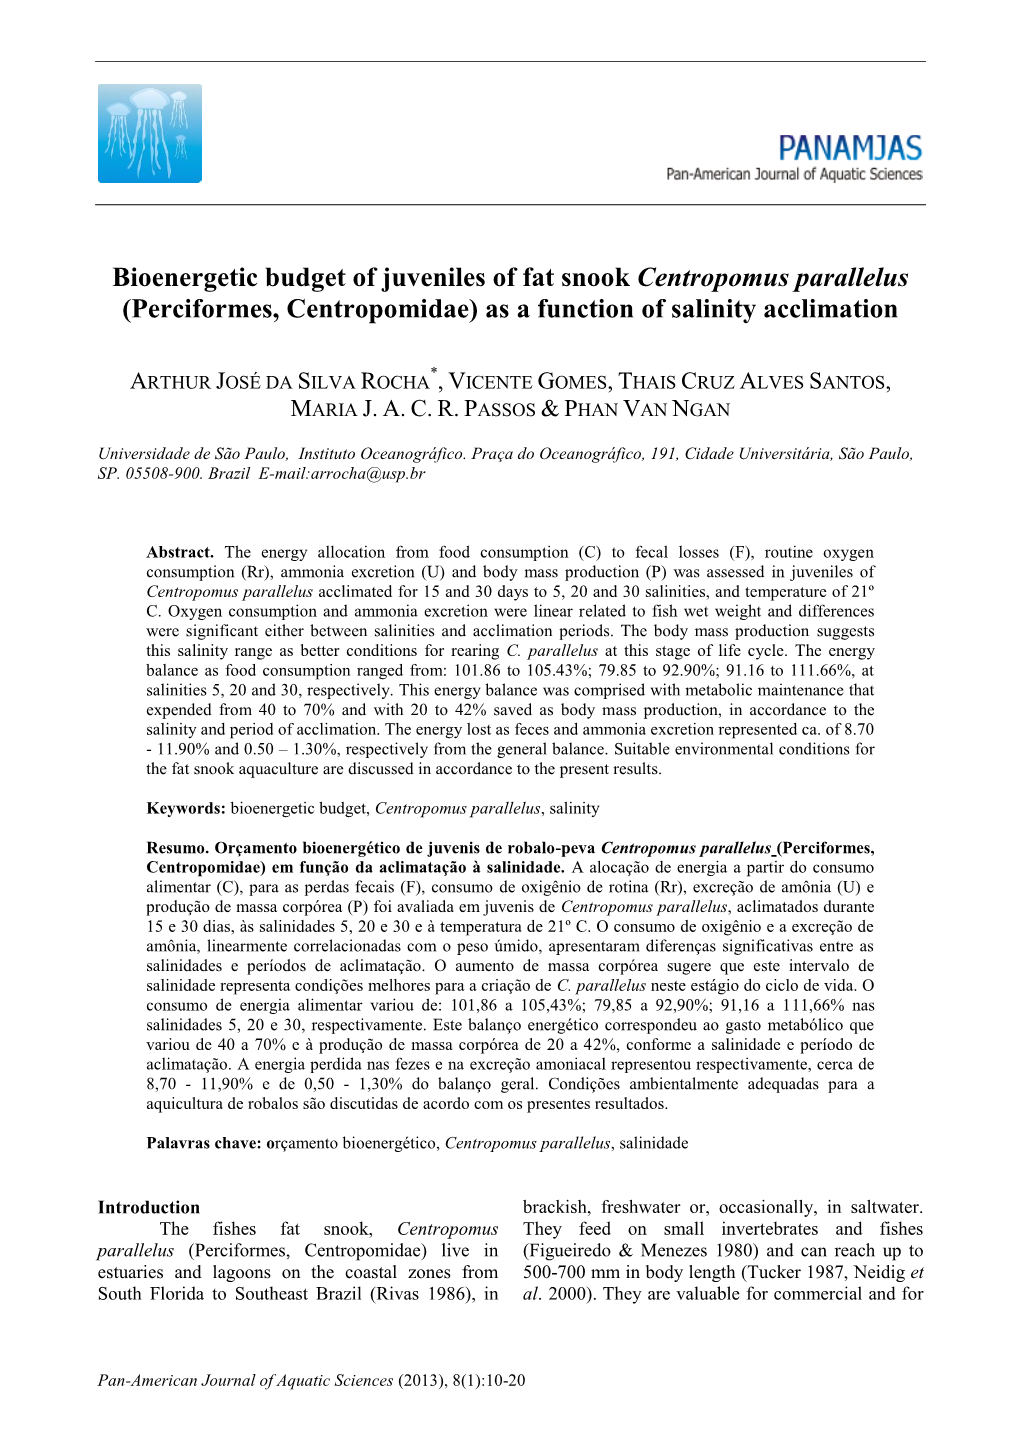 Bioenergetic Budget of Juveniles of Fat Snook Centropomus Parallelus (Perciformes, Centropomidae) As a Function of Salinity Acclimation